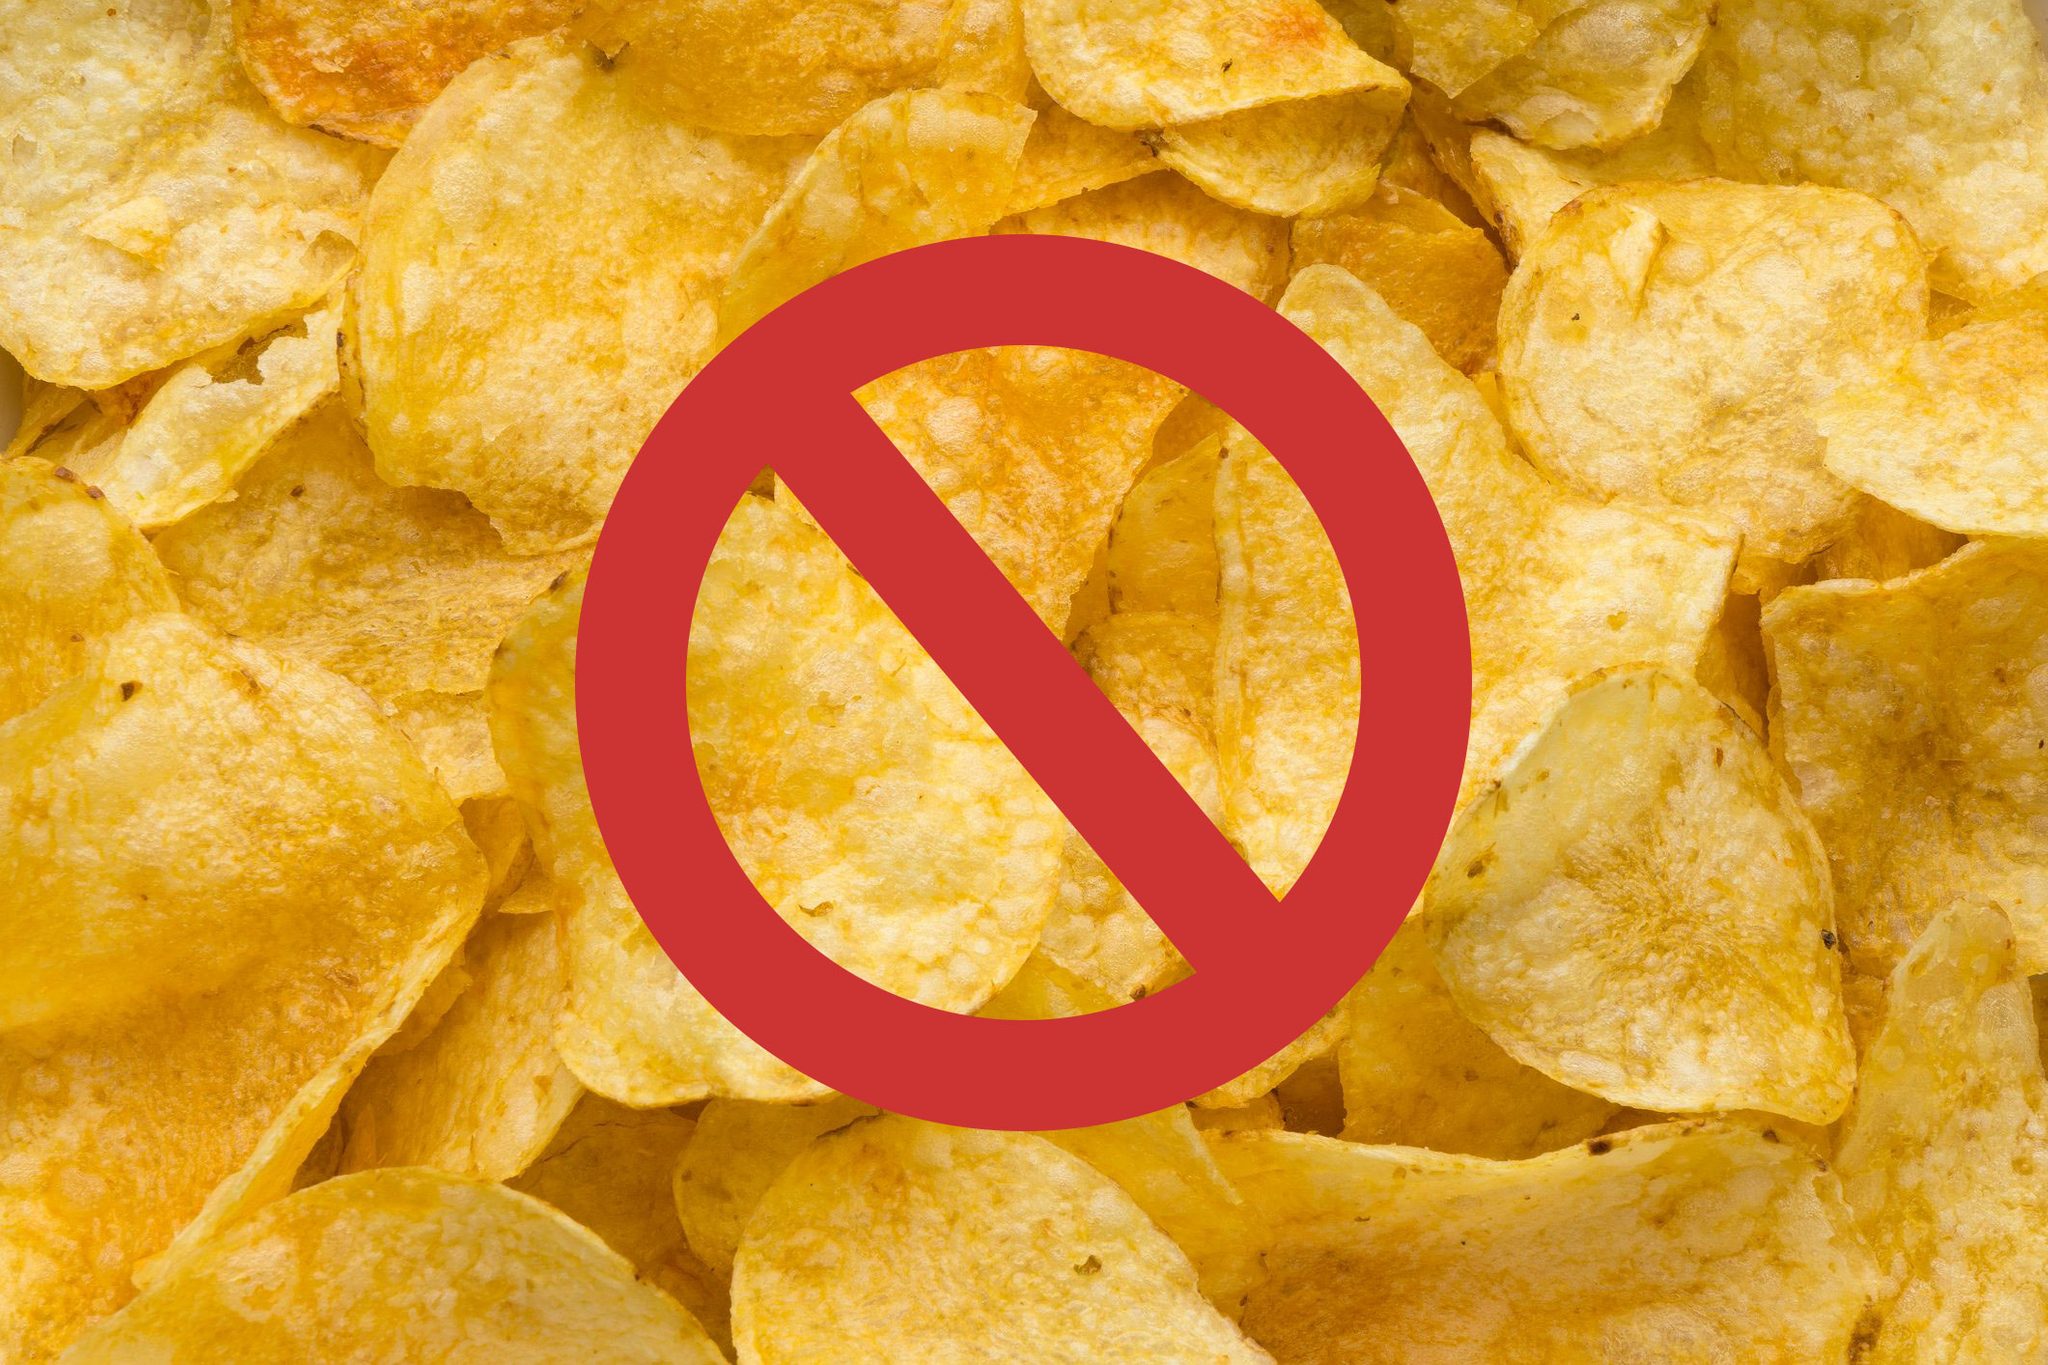 can birds eat bread, potato chips with "no" symbol overlay